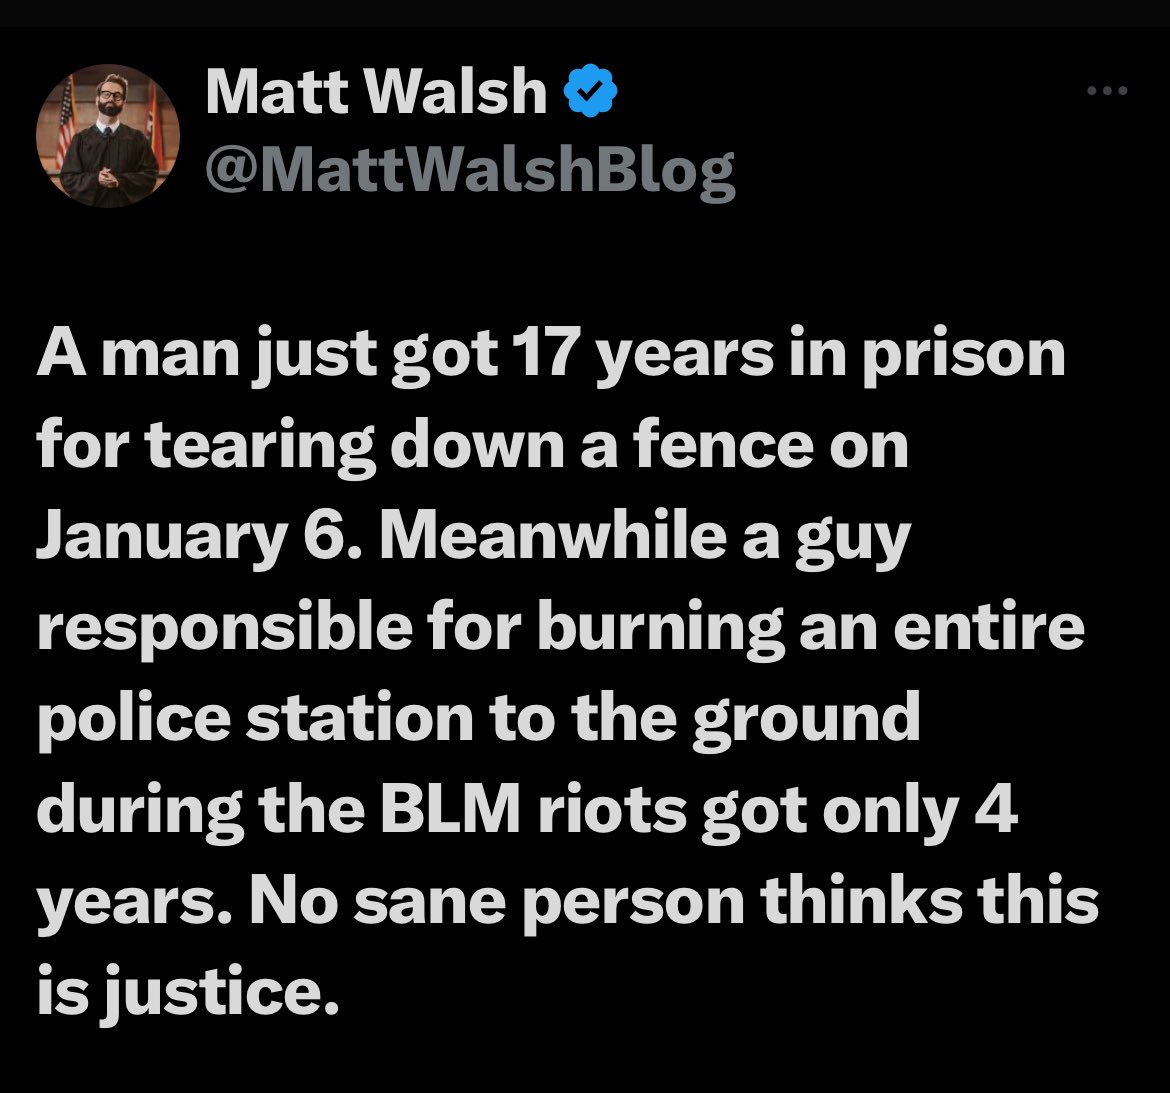 @MattWalshBlog When will they learn that if they want Matt to be outraged at too much jail time, all they have to be is white.